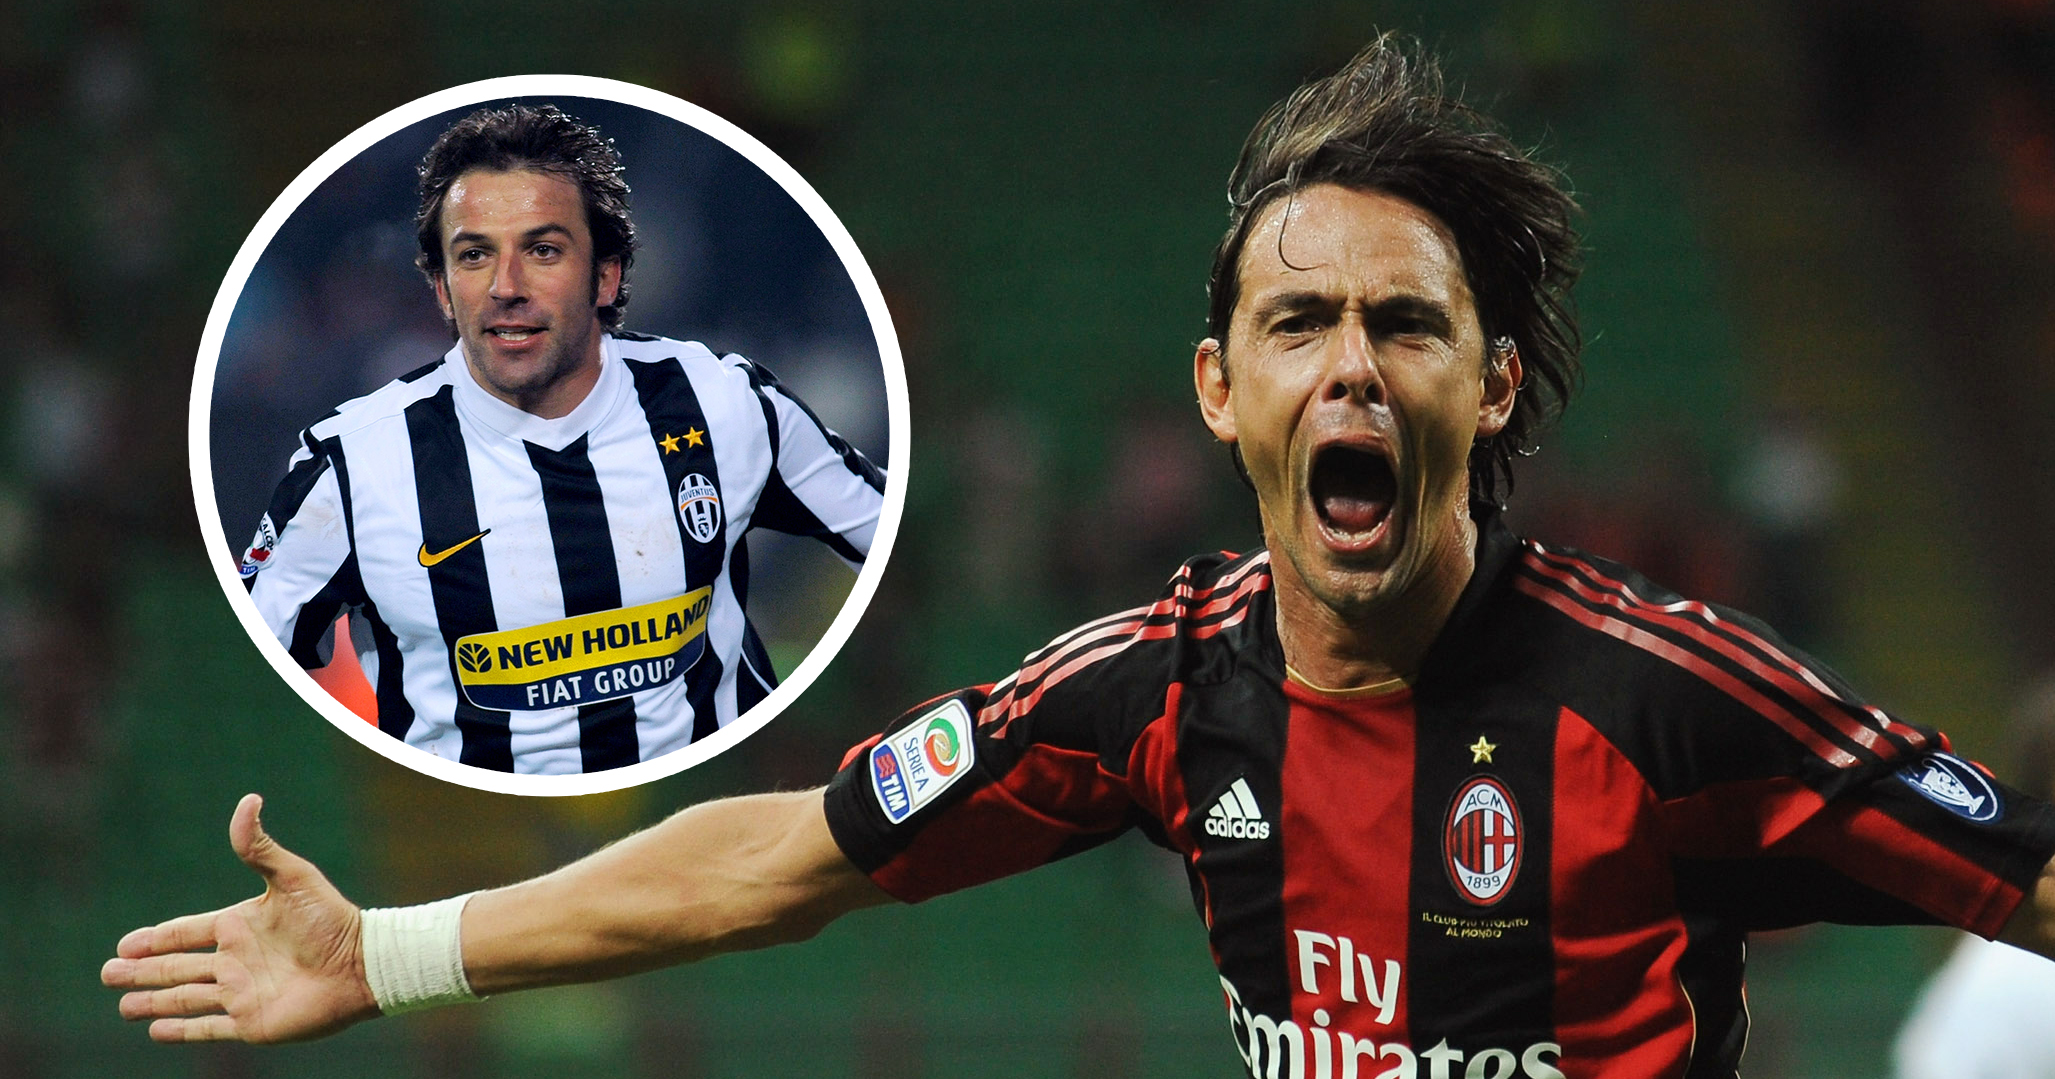 Pippo Inzaghi addresses the ‘friction’ between himself and Alessandro Del Piero